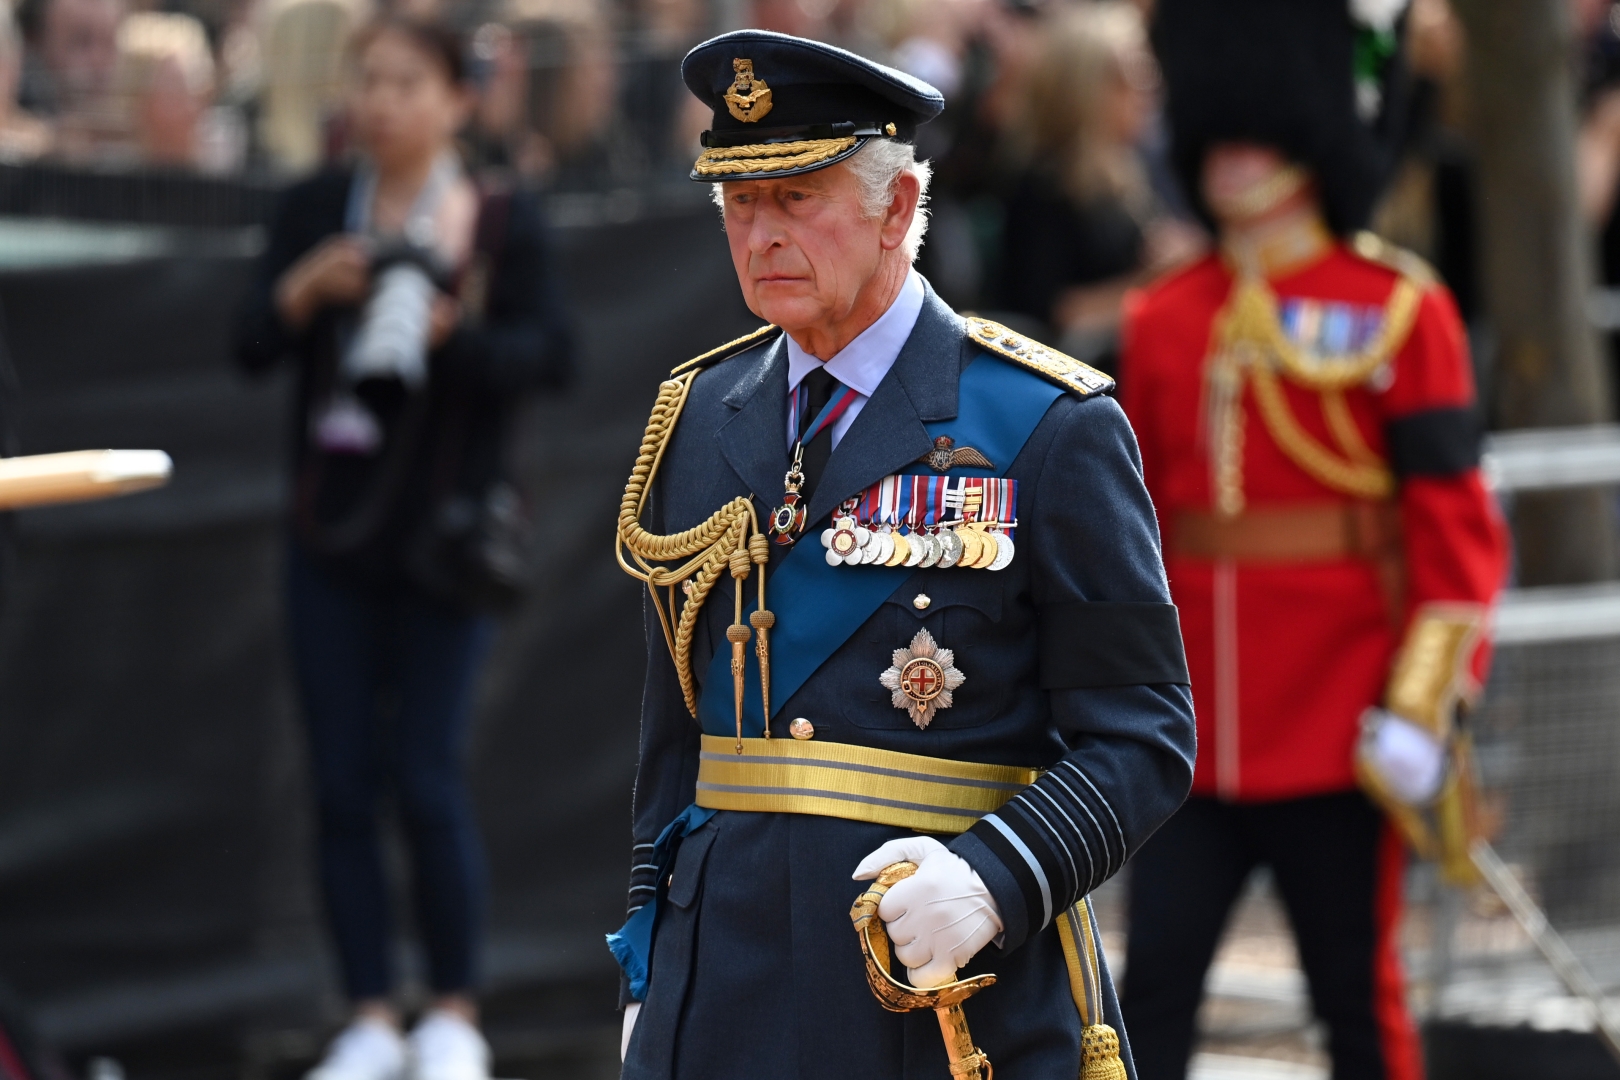 King Charles III crowned at UK’s first coronation ceremony in 70 years